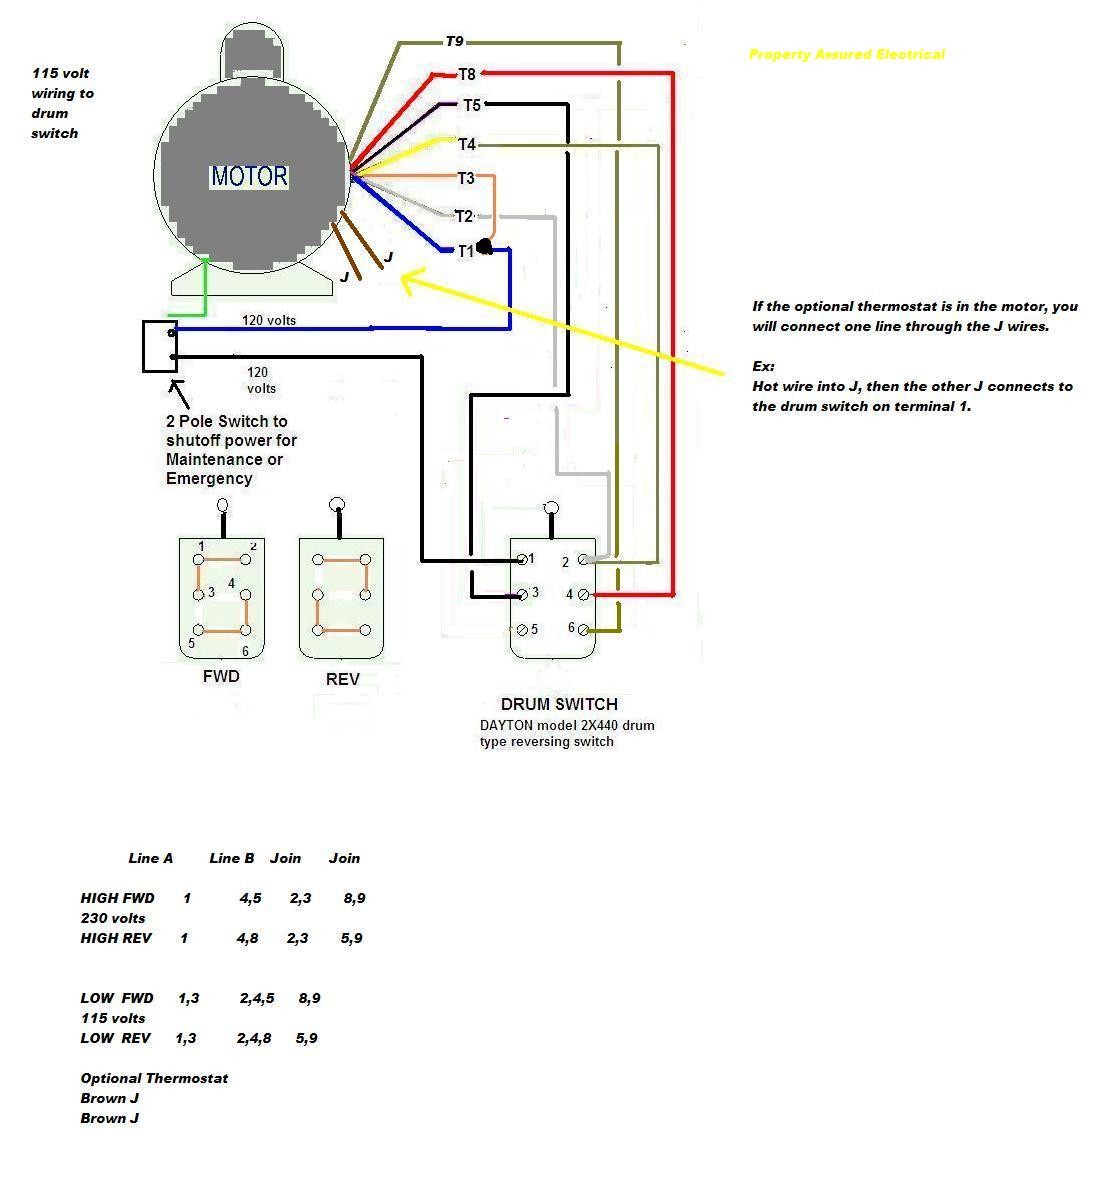 reliance electric motor wiring diagram trusted wiring diagram rh dafpods co 115 230 Motor Wiring 115